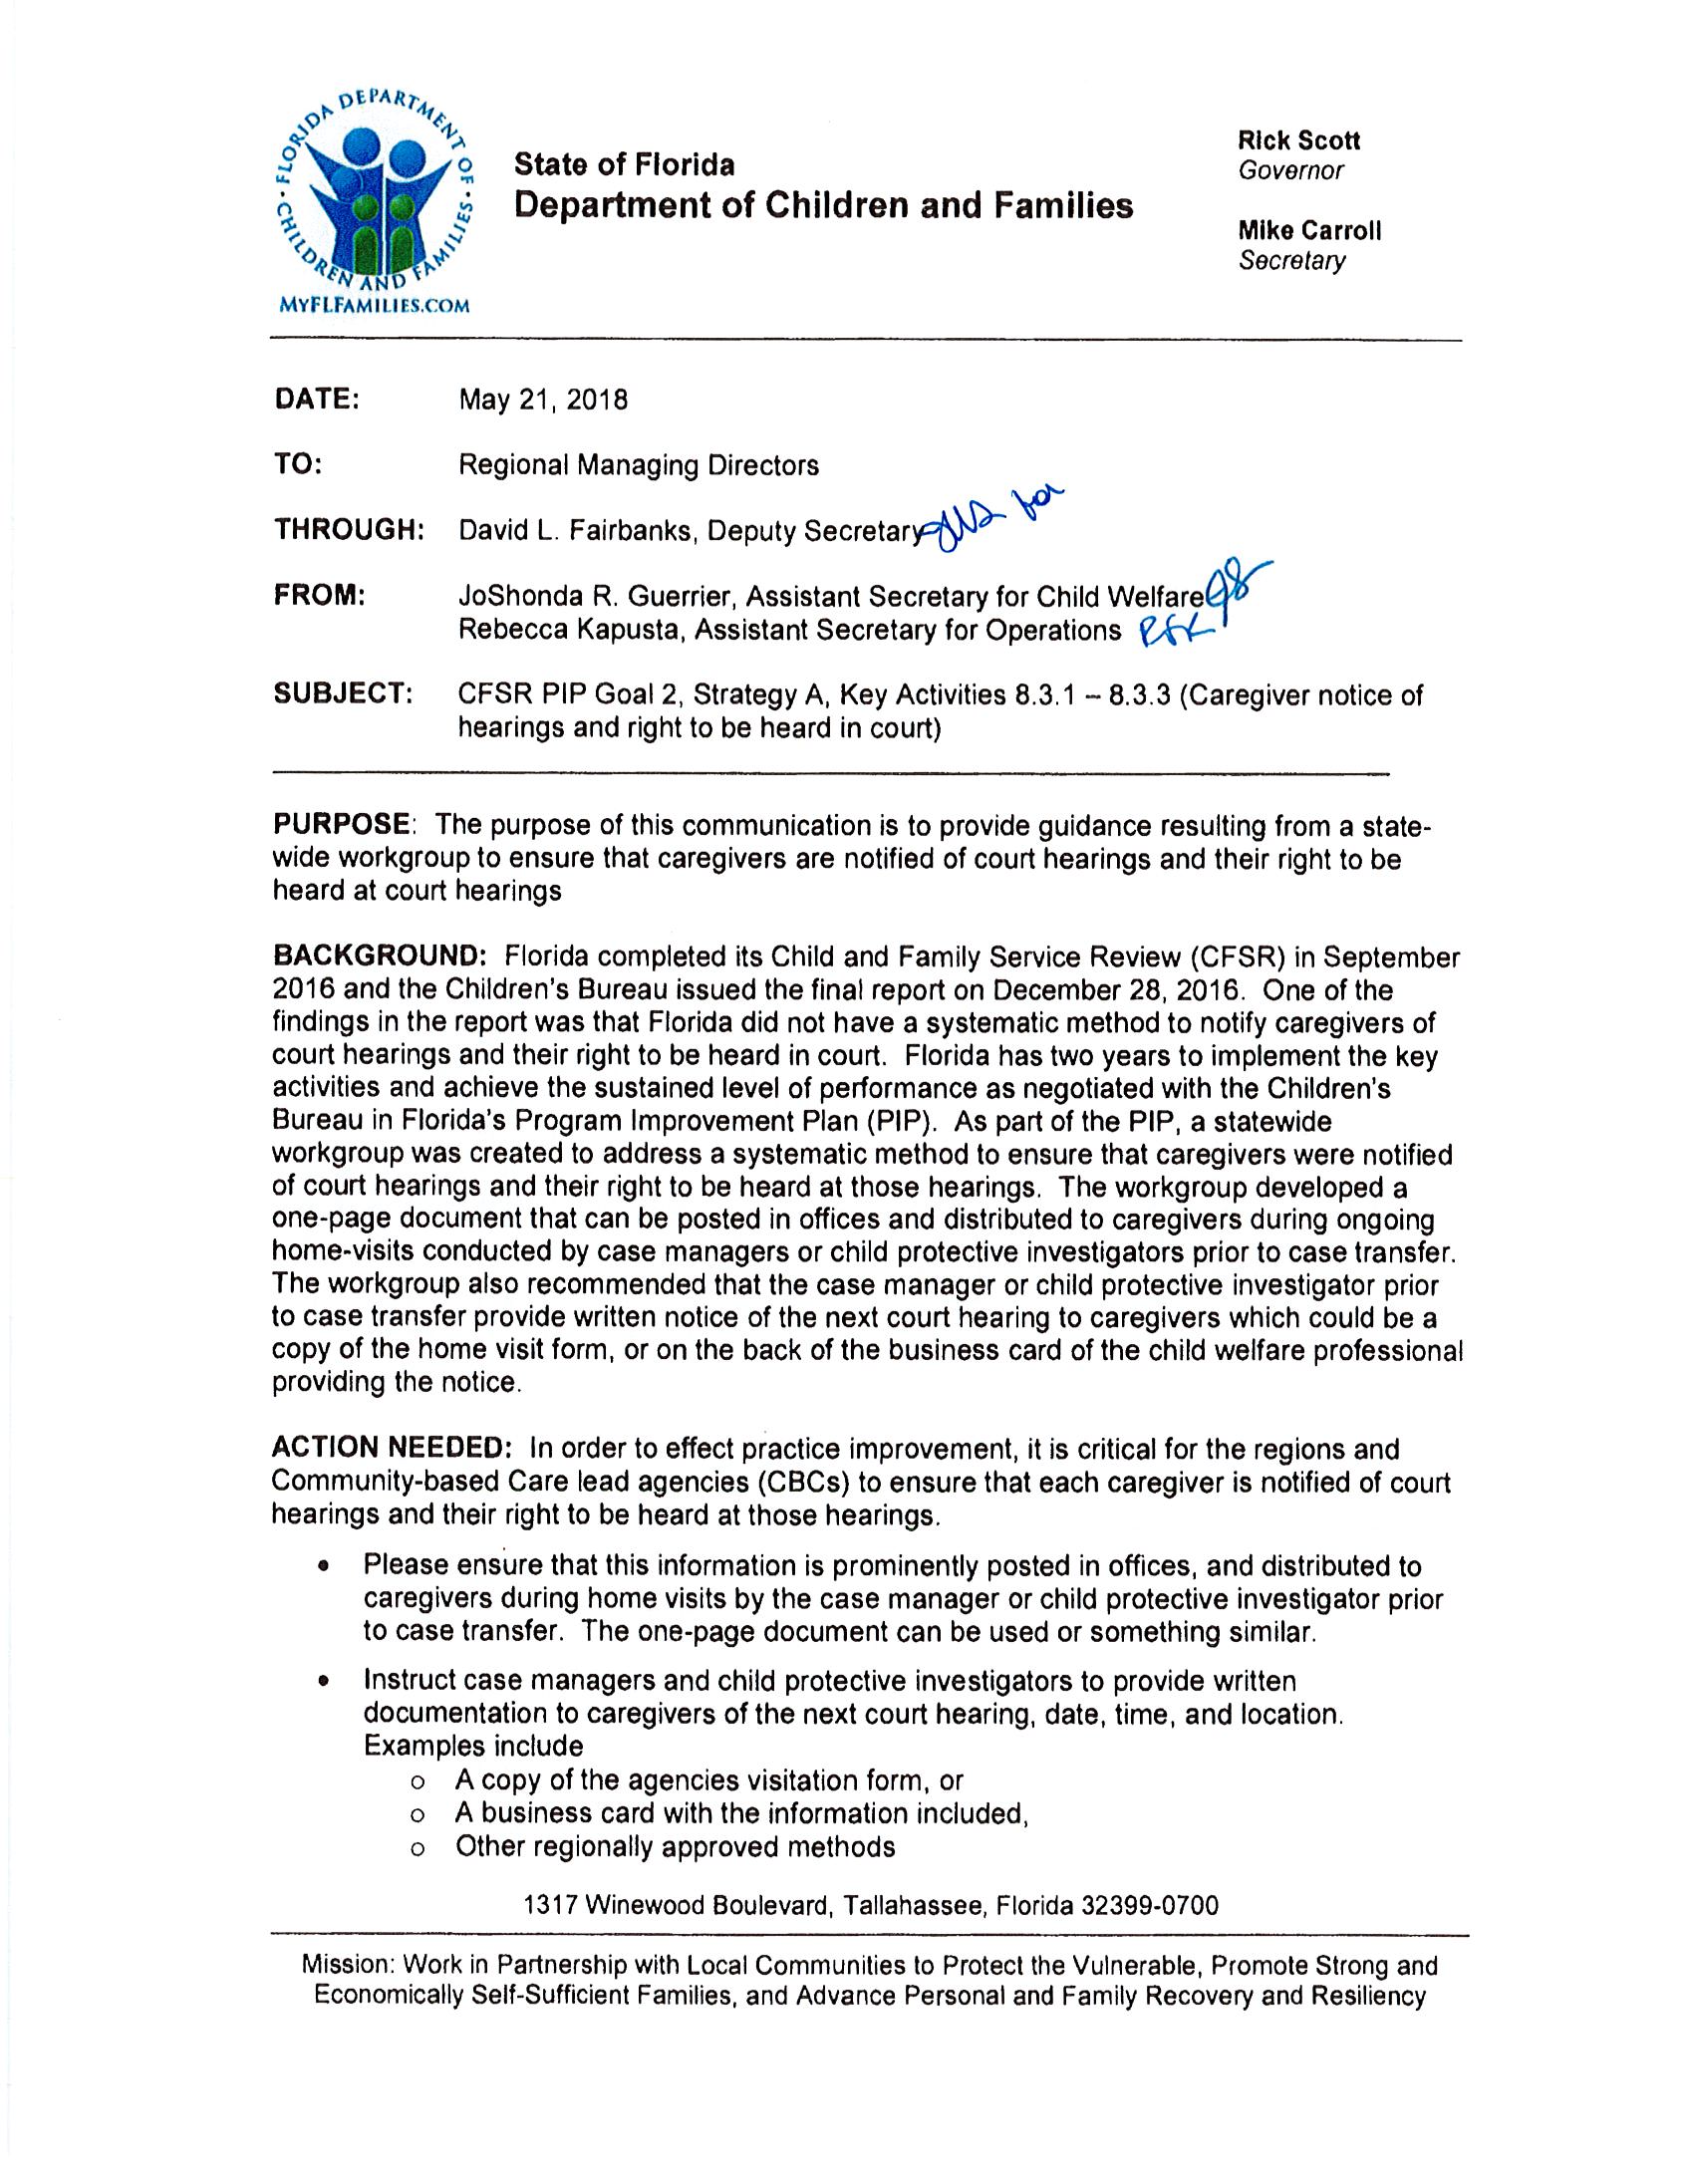 Caregivers Notice of Hearings Letter P1